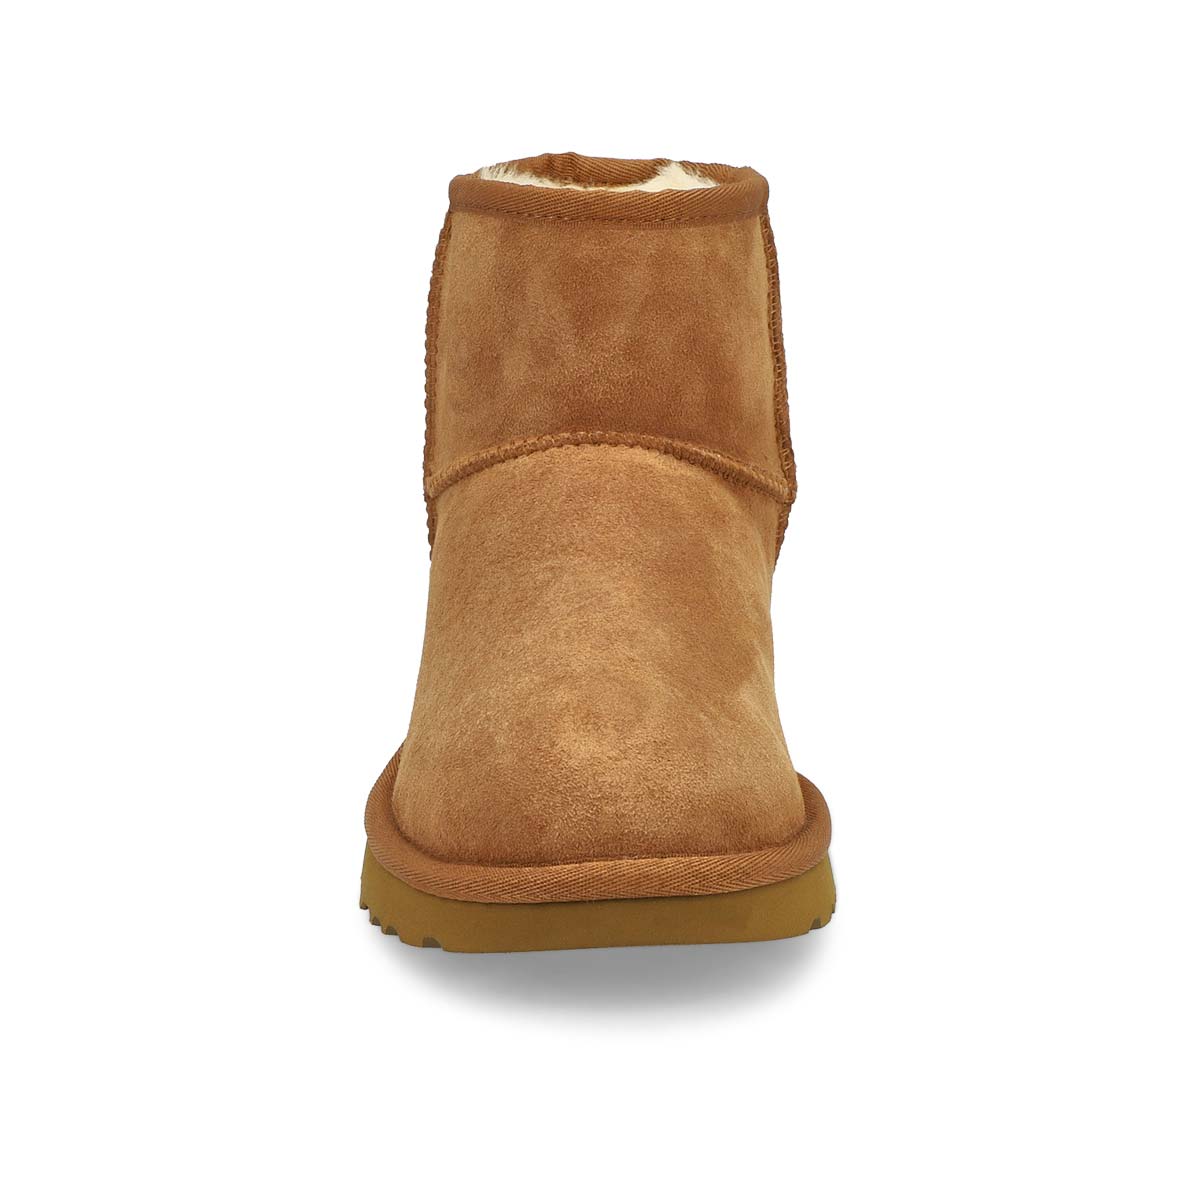 official ugg retailers online